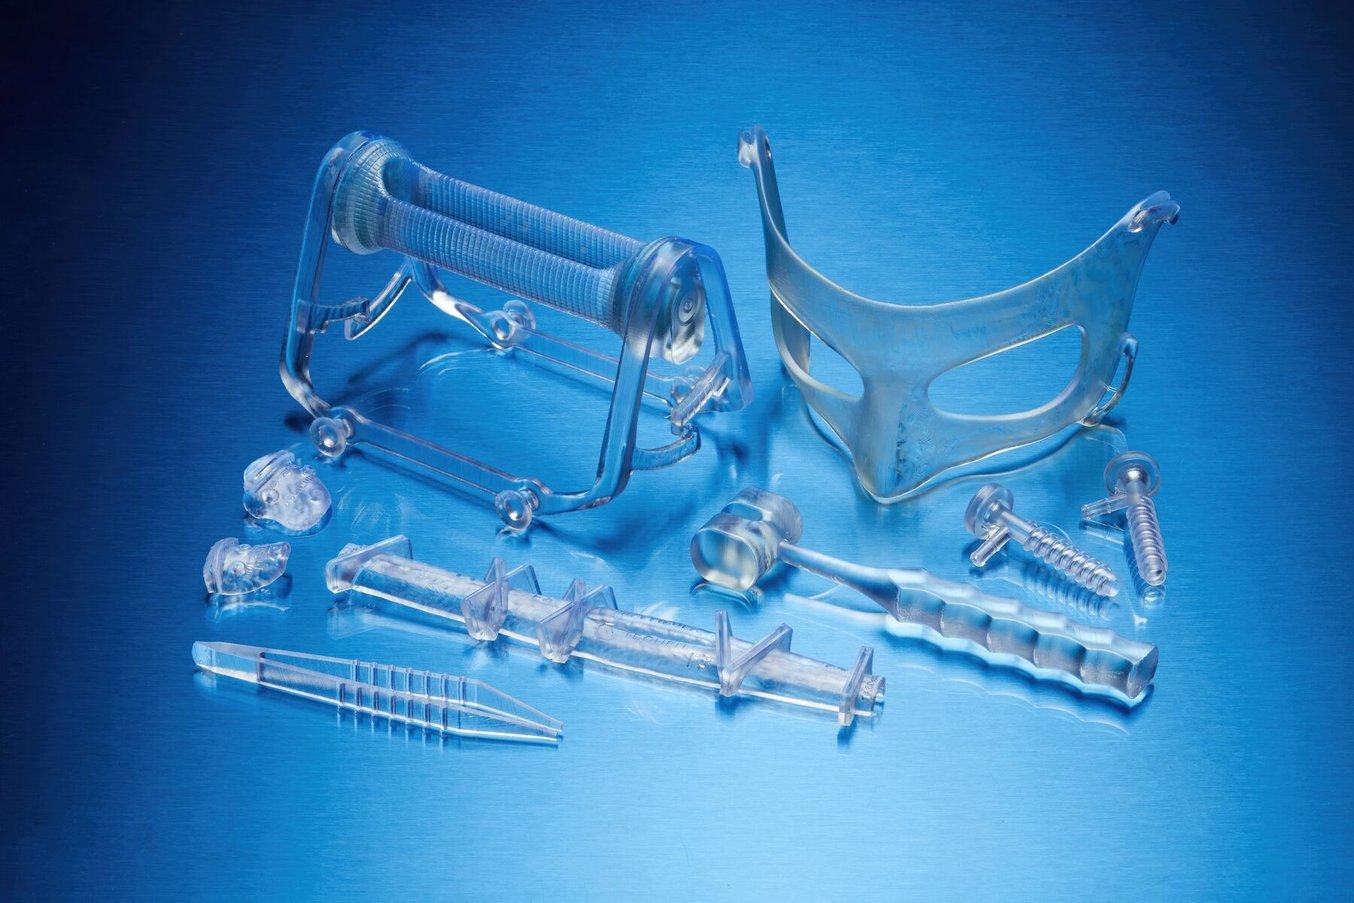 Clear, 3D printed medical devices on a blue background